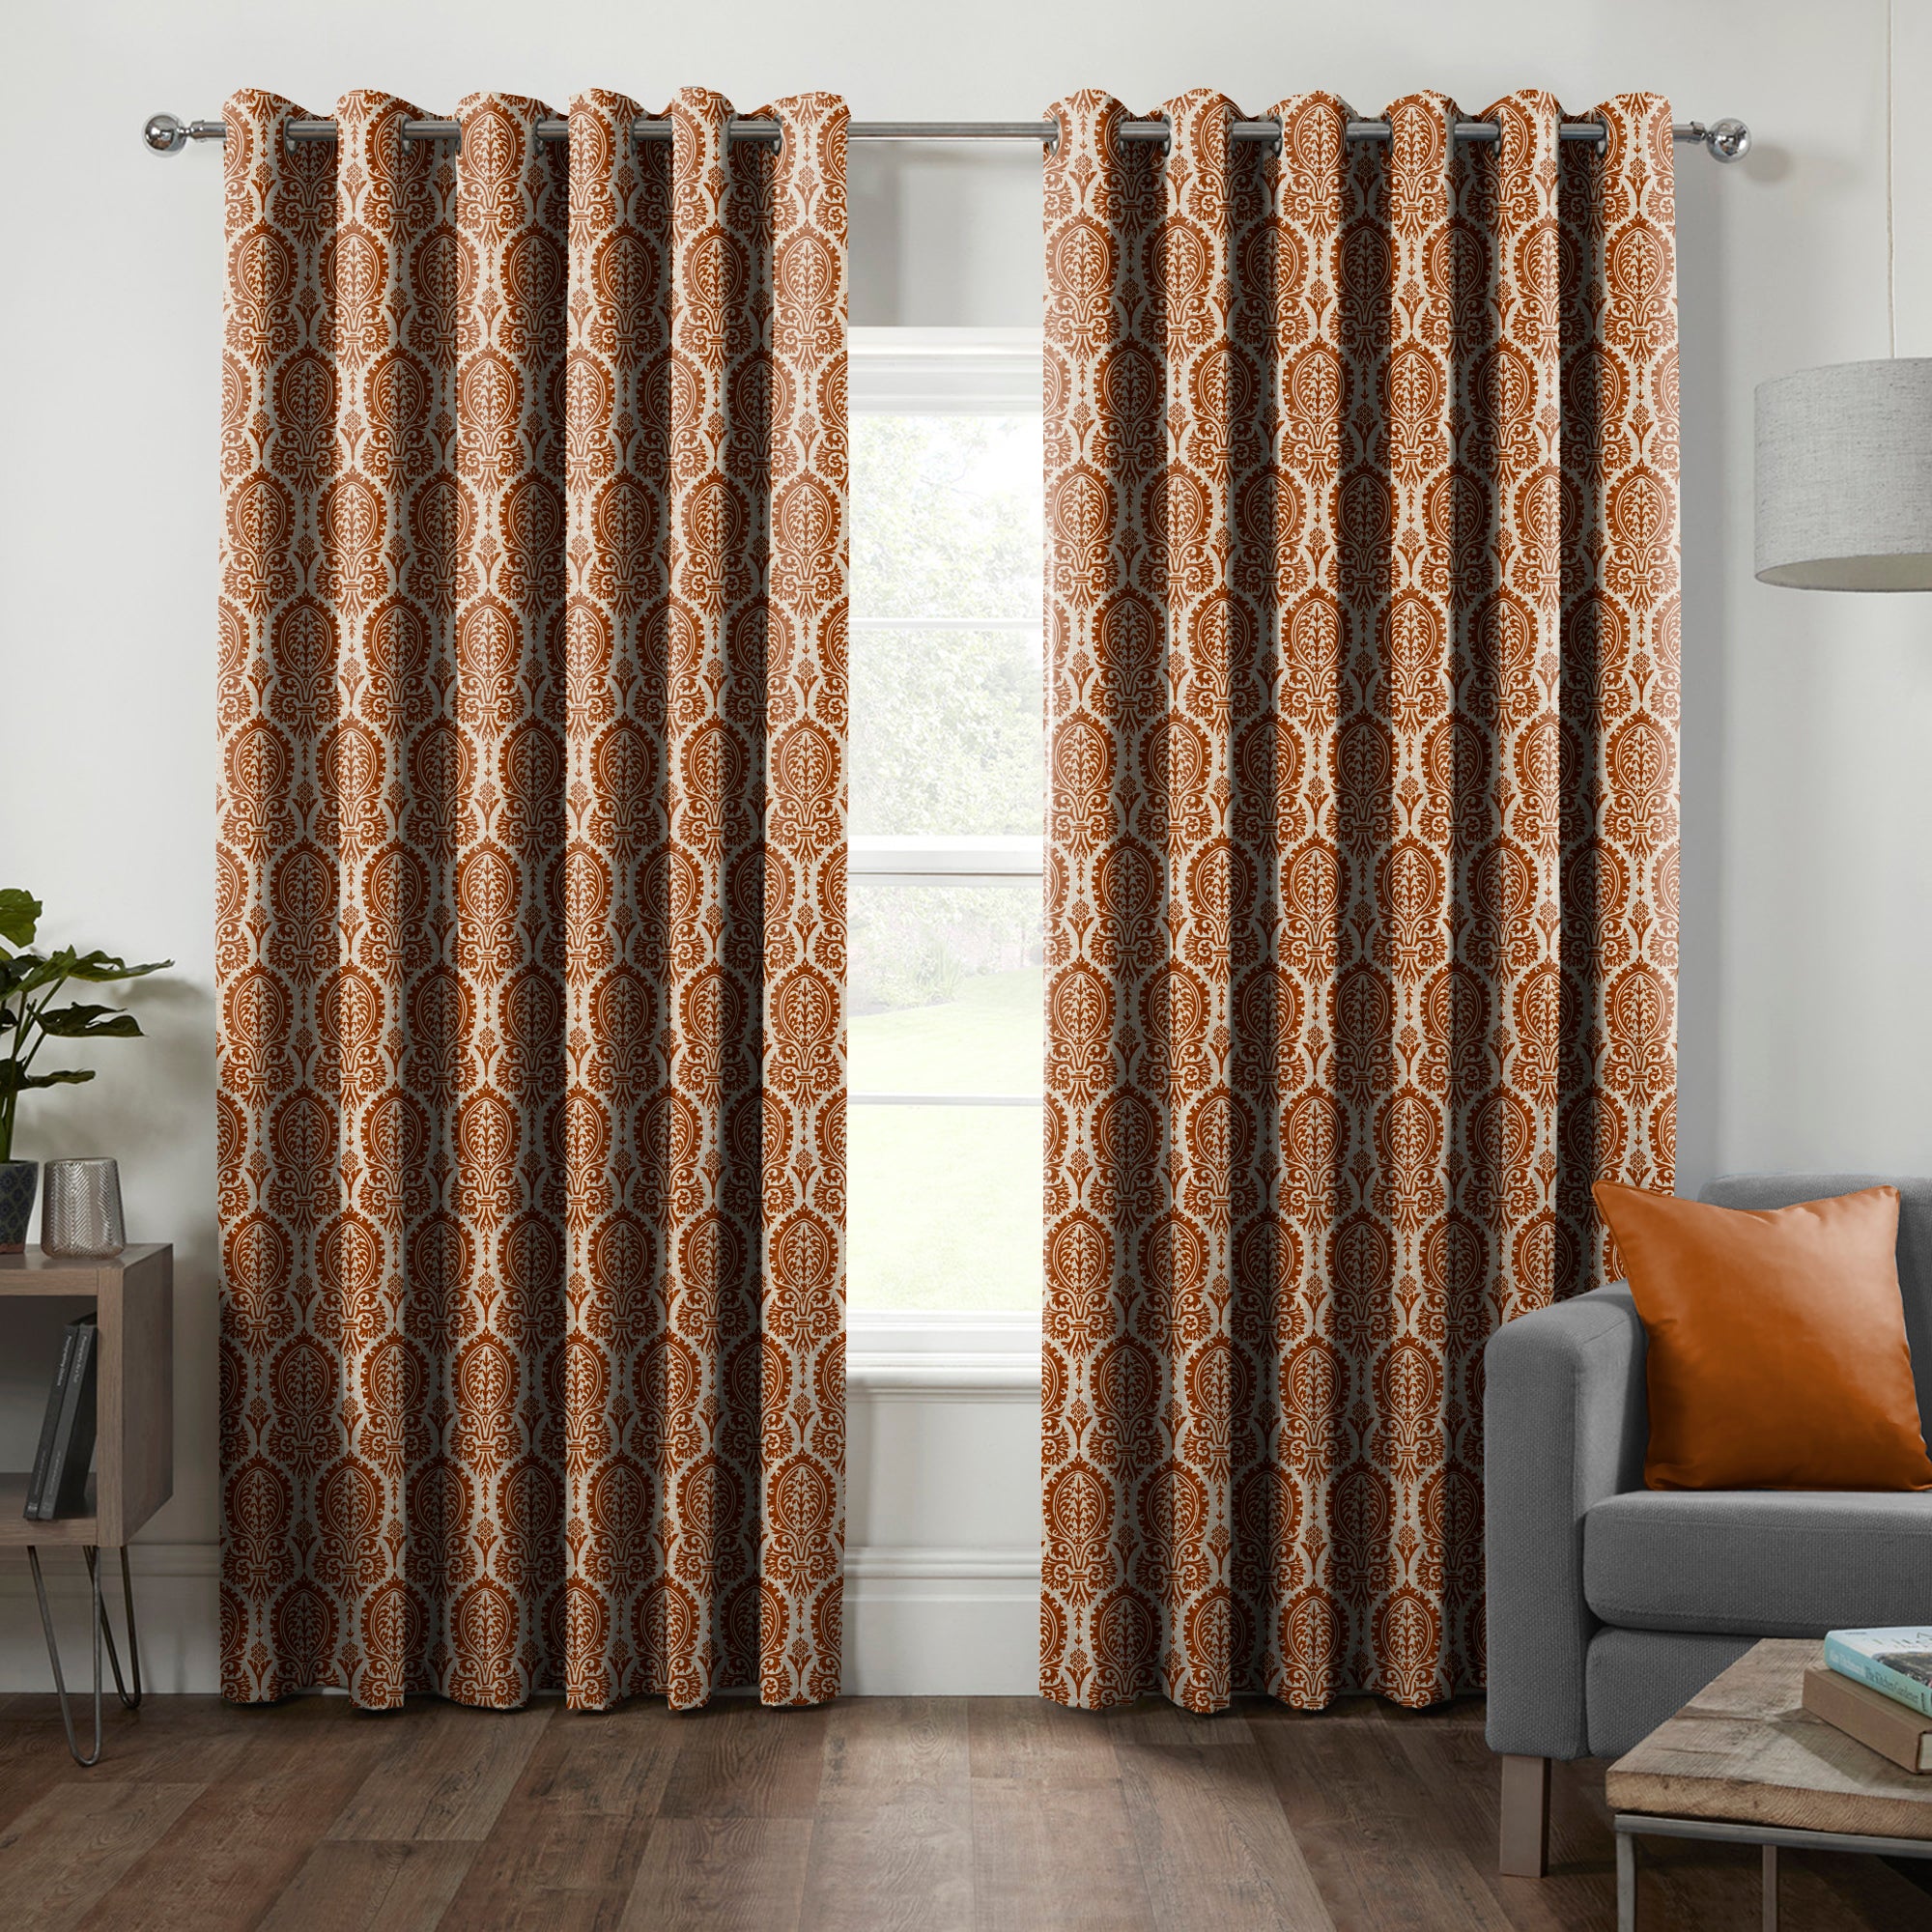 MANCHESTER SADDLE BROWN BLACKOUT CURTAIN